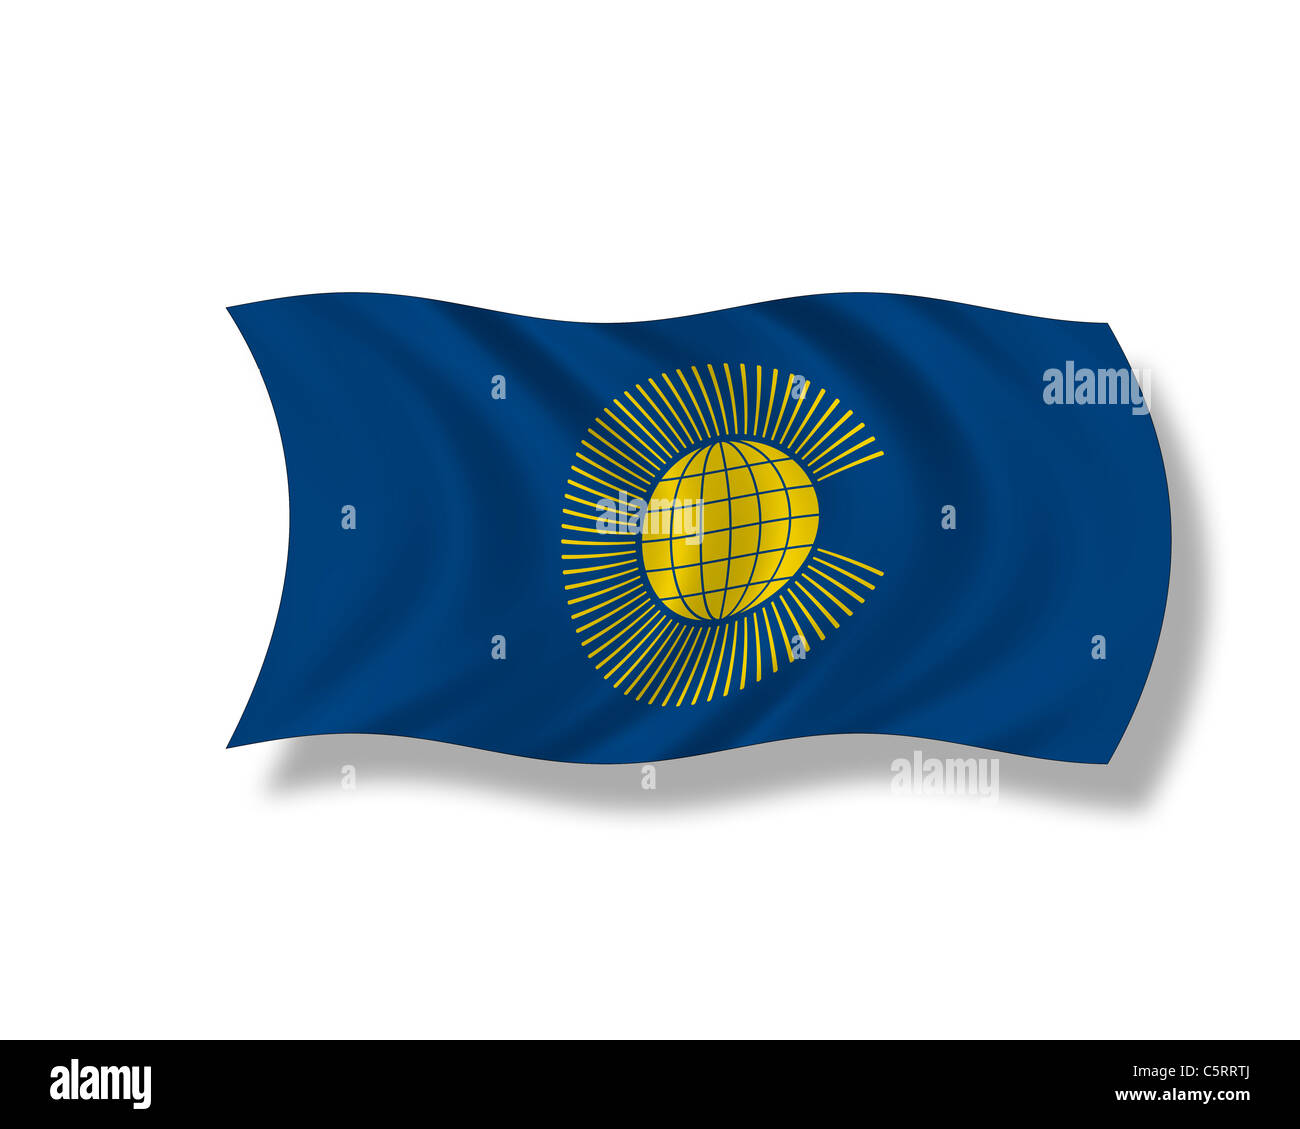 Abbildung, Flagge des Commonwealth Of Nations Stockfoto